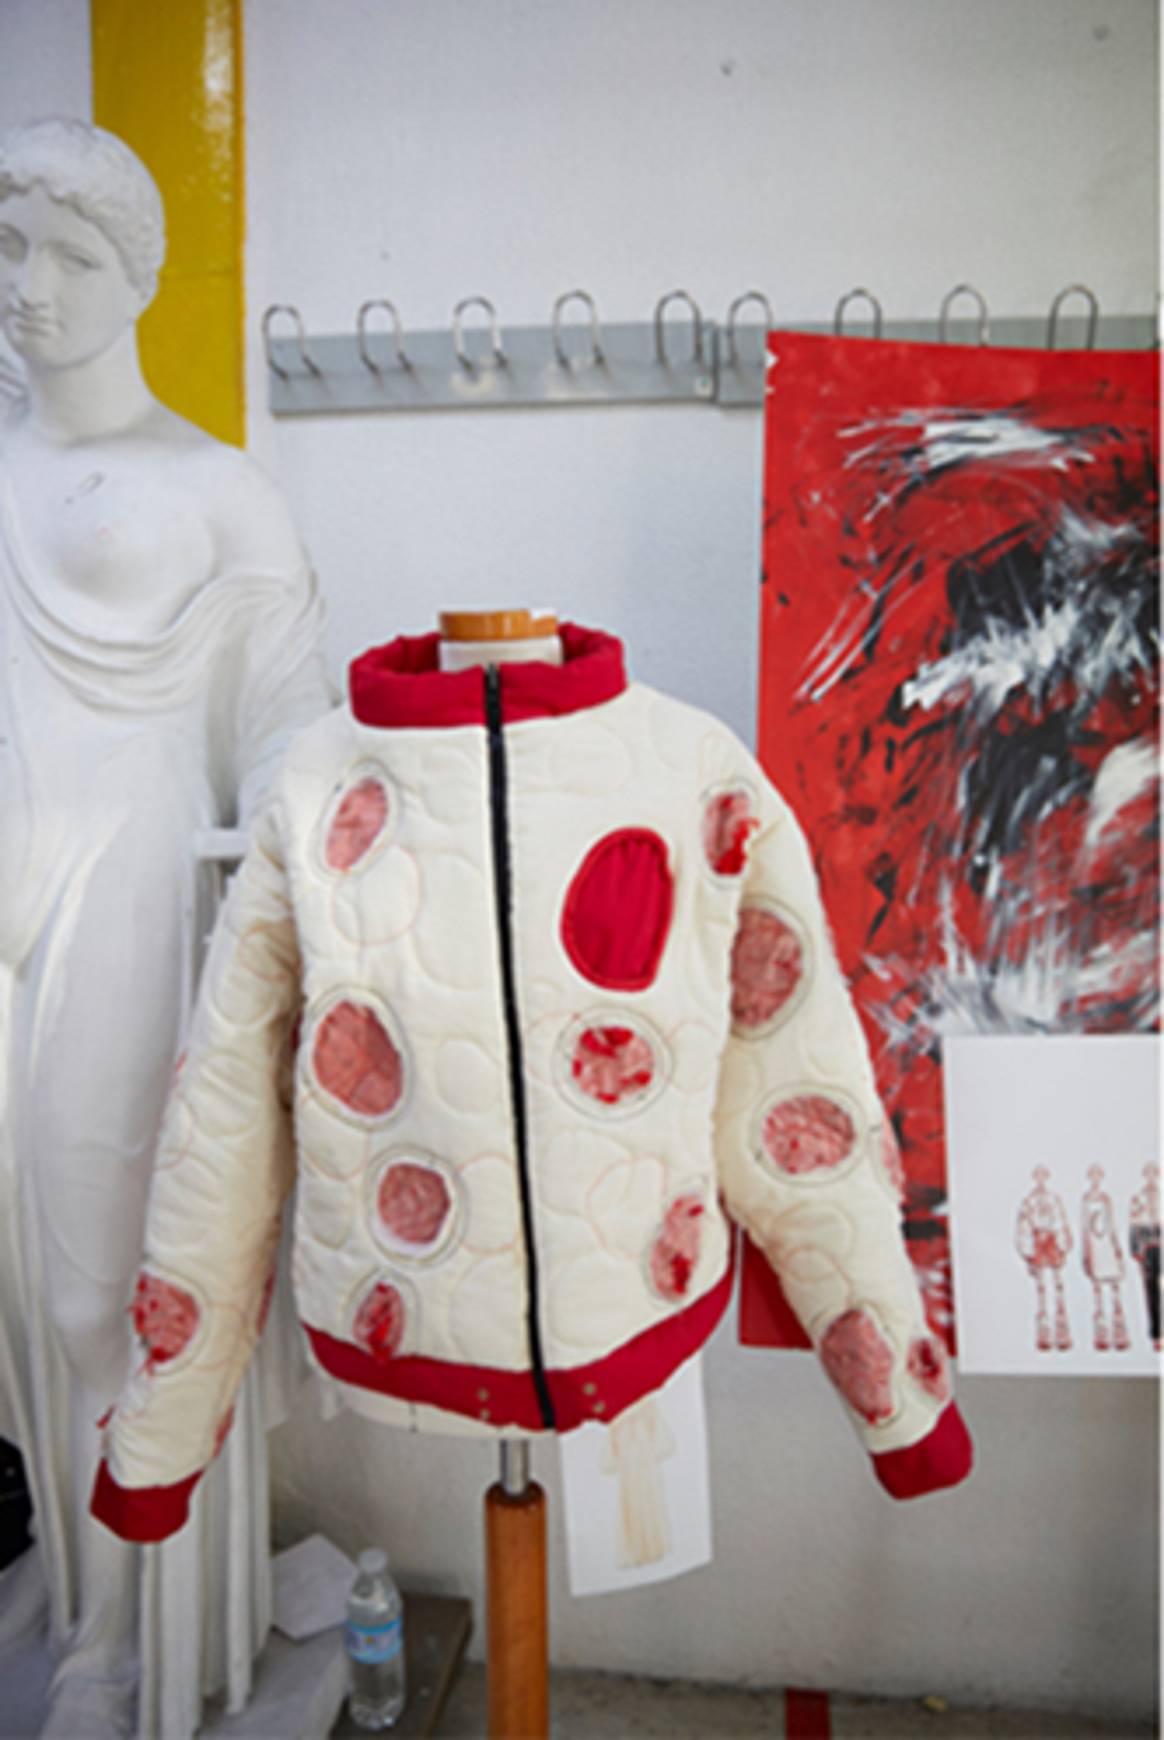 Image: the winning upcycled designs by UPM students Ane Bajo Dior Cámara and Maria Gutierrez. Courtesy of H&M.